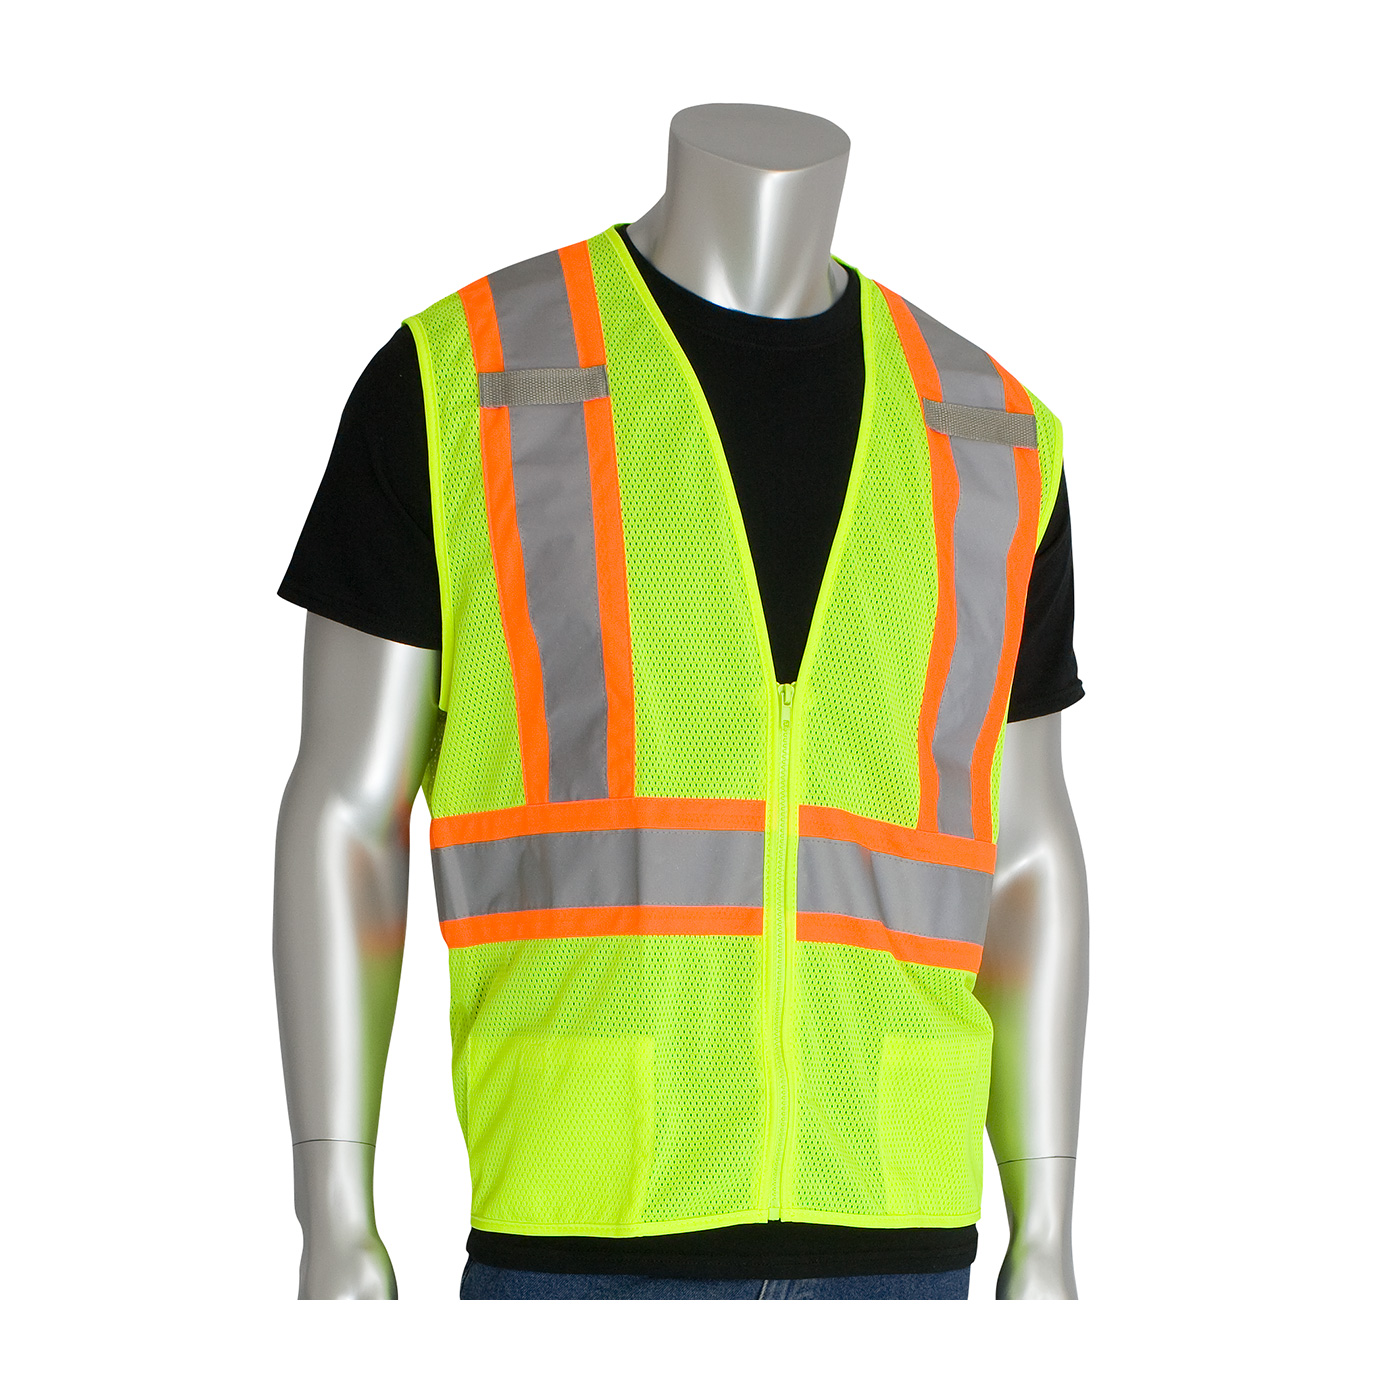 PIP® Type/Class R2 Two-Tone D-Ring Mesh Vests #302-0600D-LY